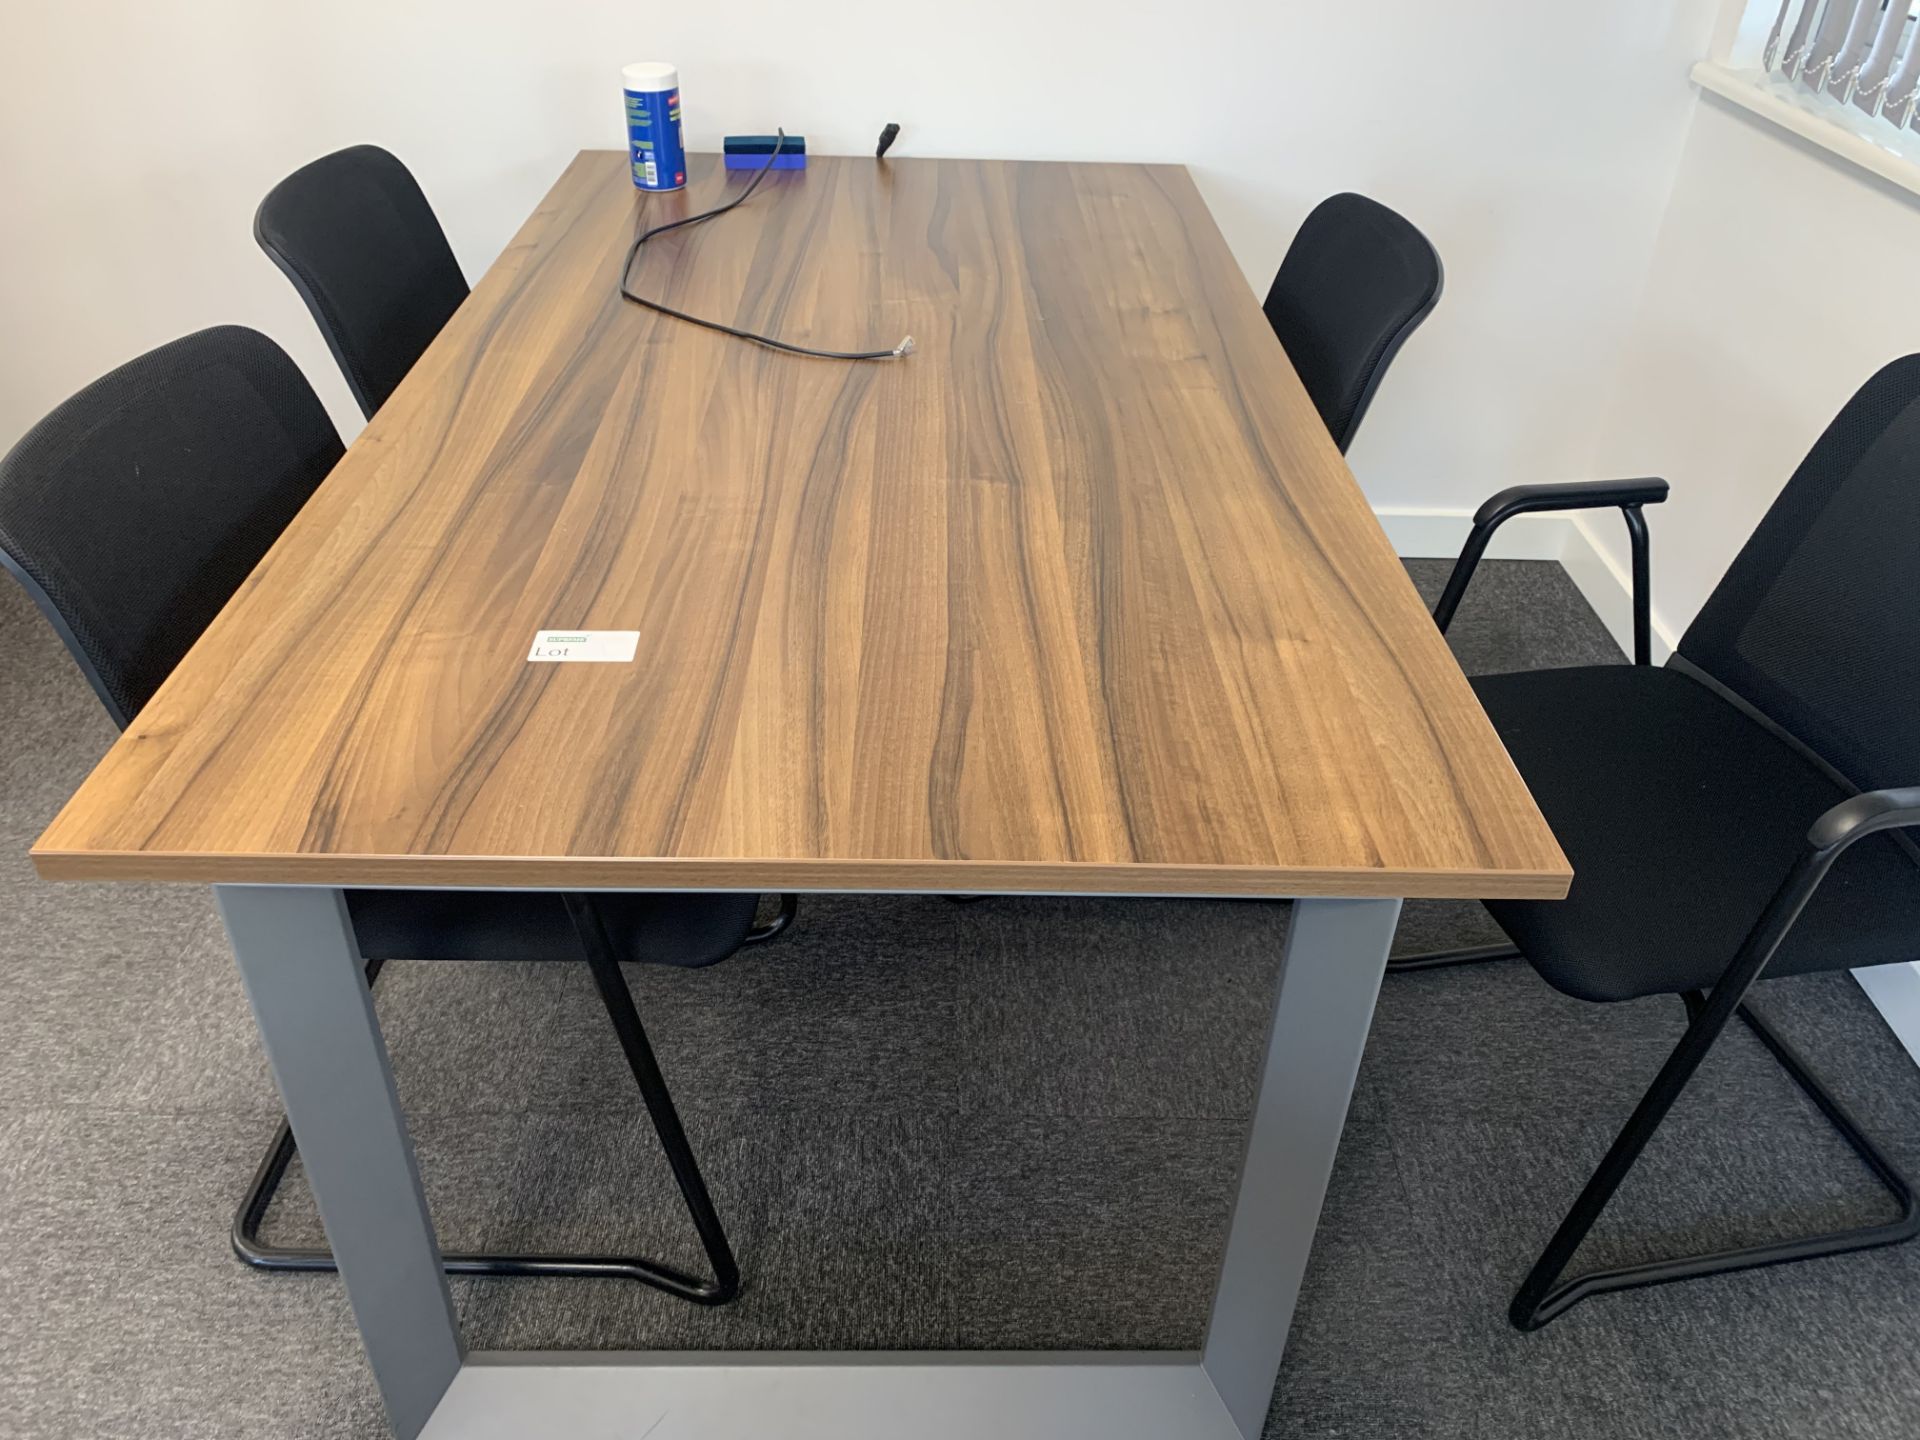 4 SEATER WALNUT EFFECT OFFICE TABLE WITH CHAIRS